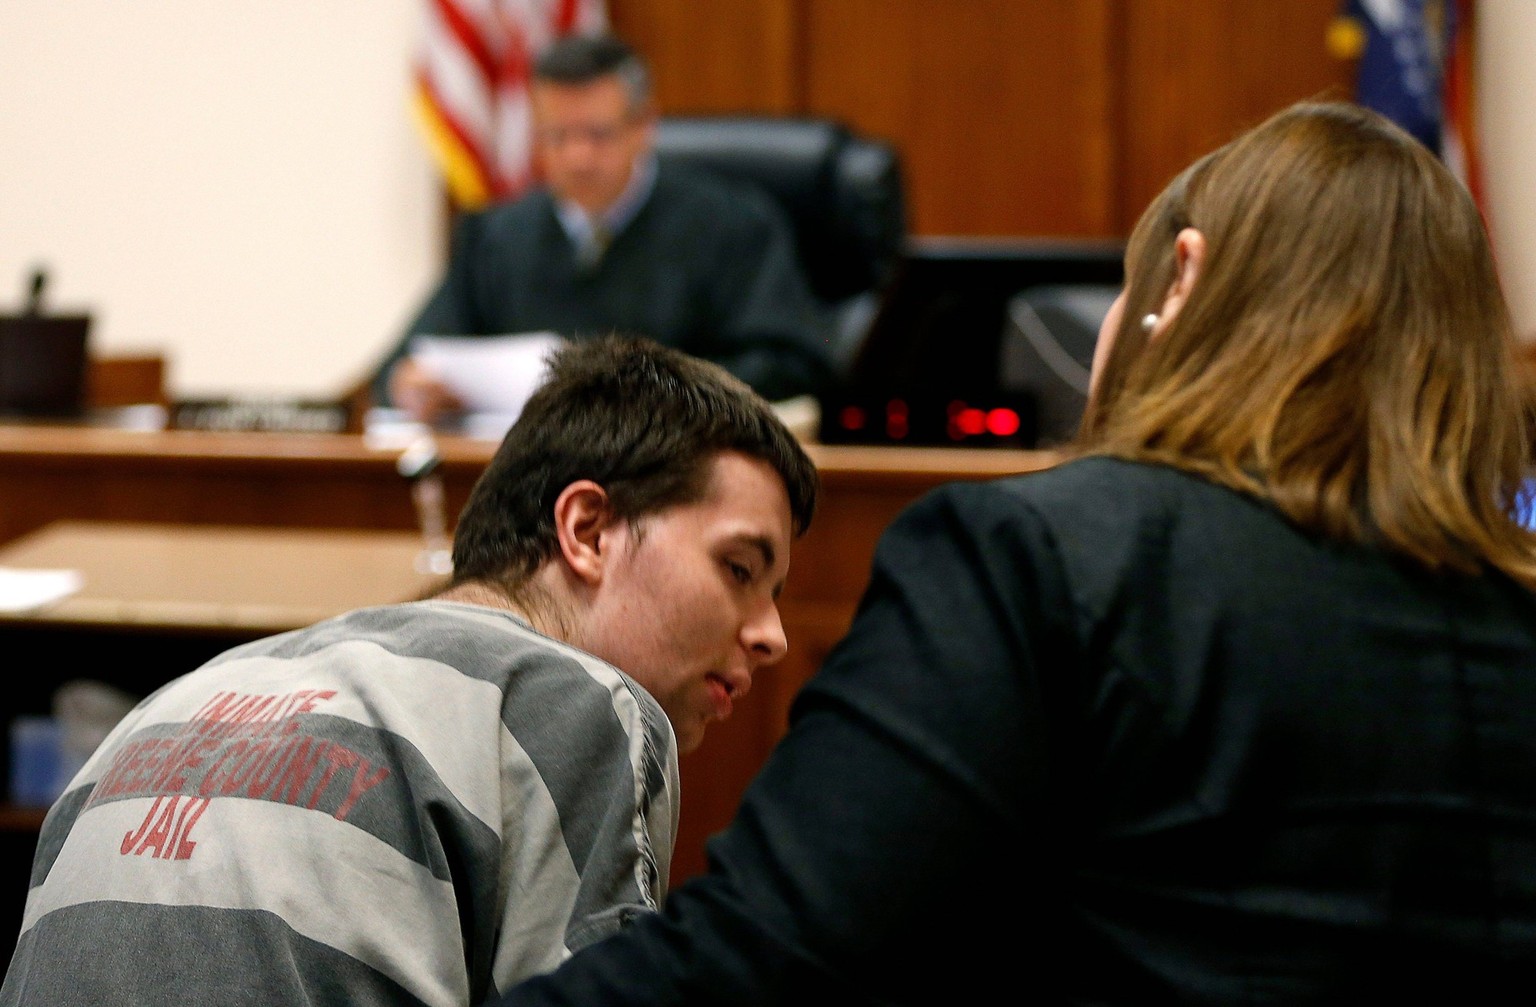 News: Gypsy Blanchard DATE UNKNOWN Springfield, MO, USA Nicholas Godejohn pleaded not guilty to two charges in a strange case in which he is accused of killing his girlfriend s mother in a home just n ...